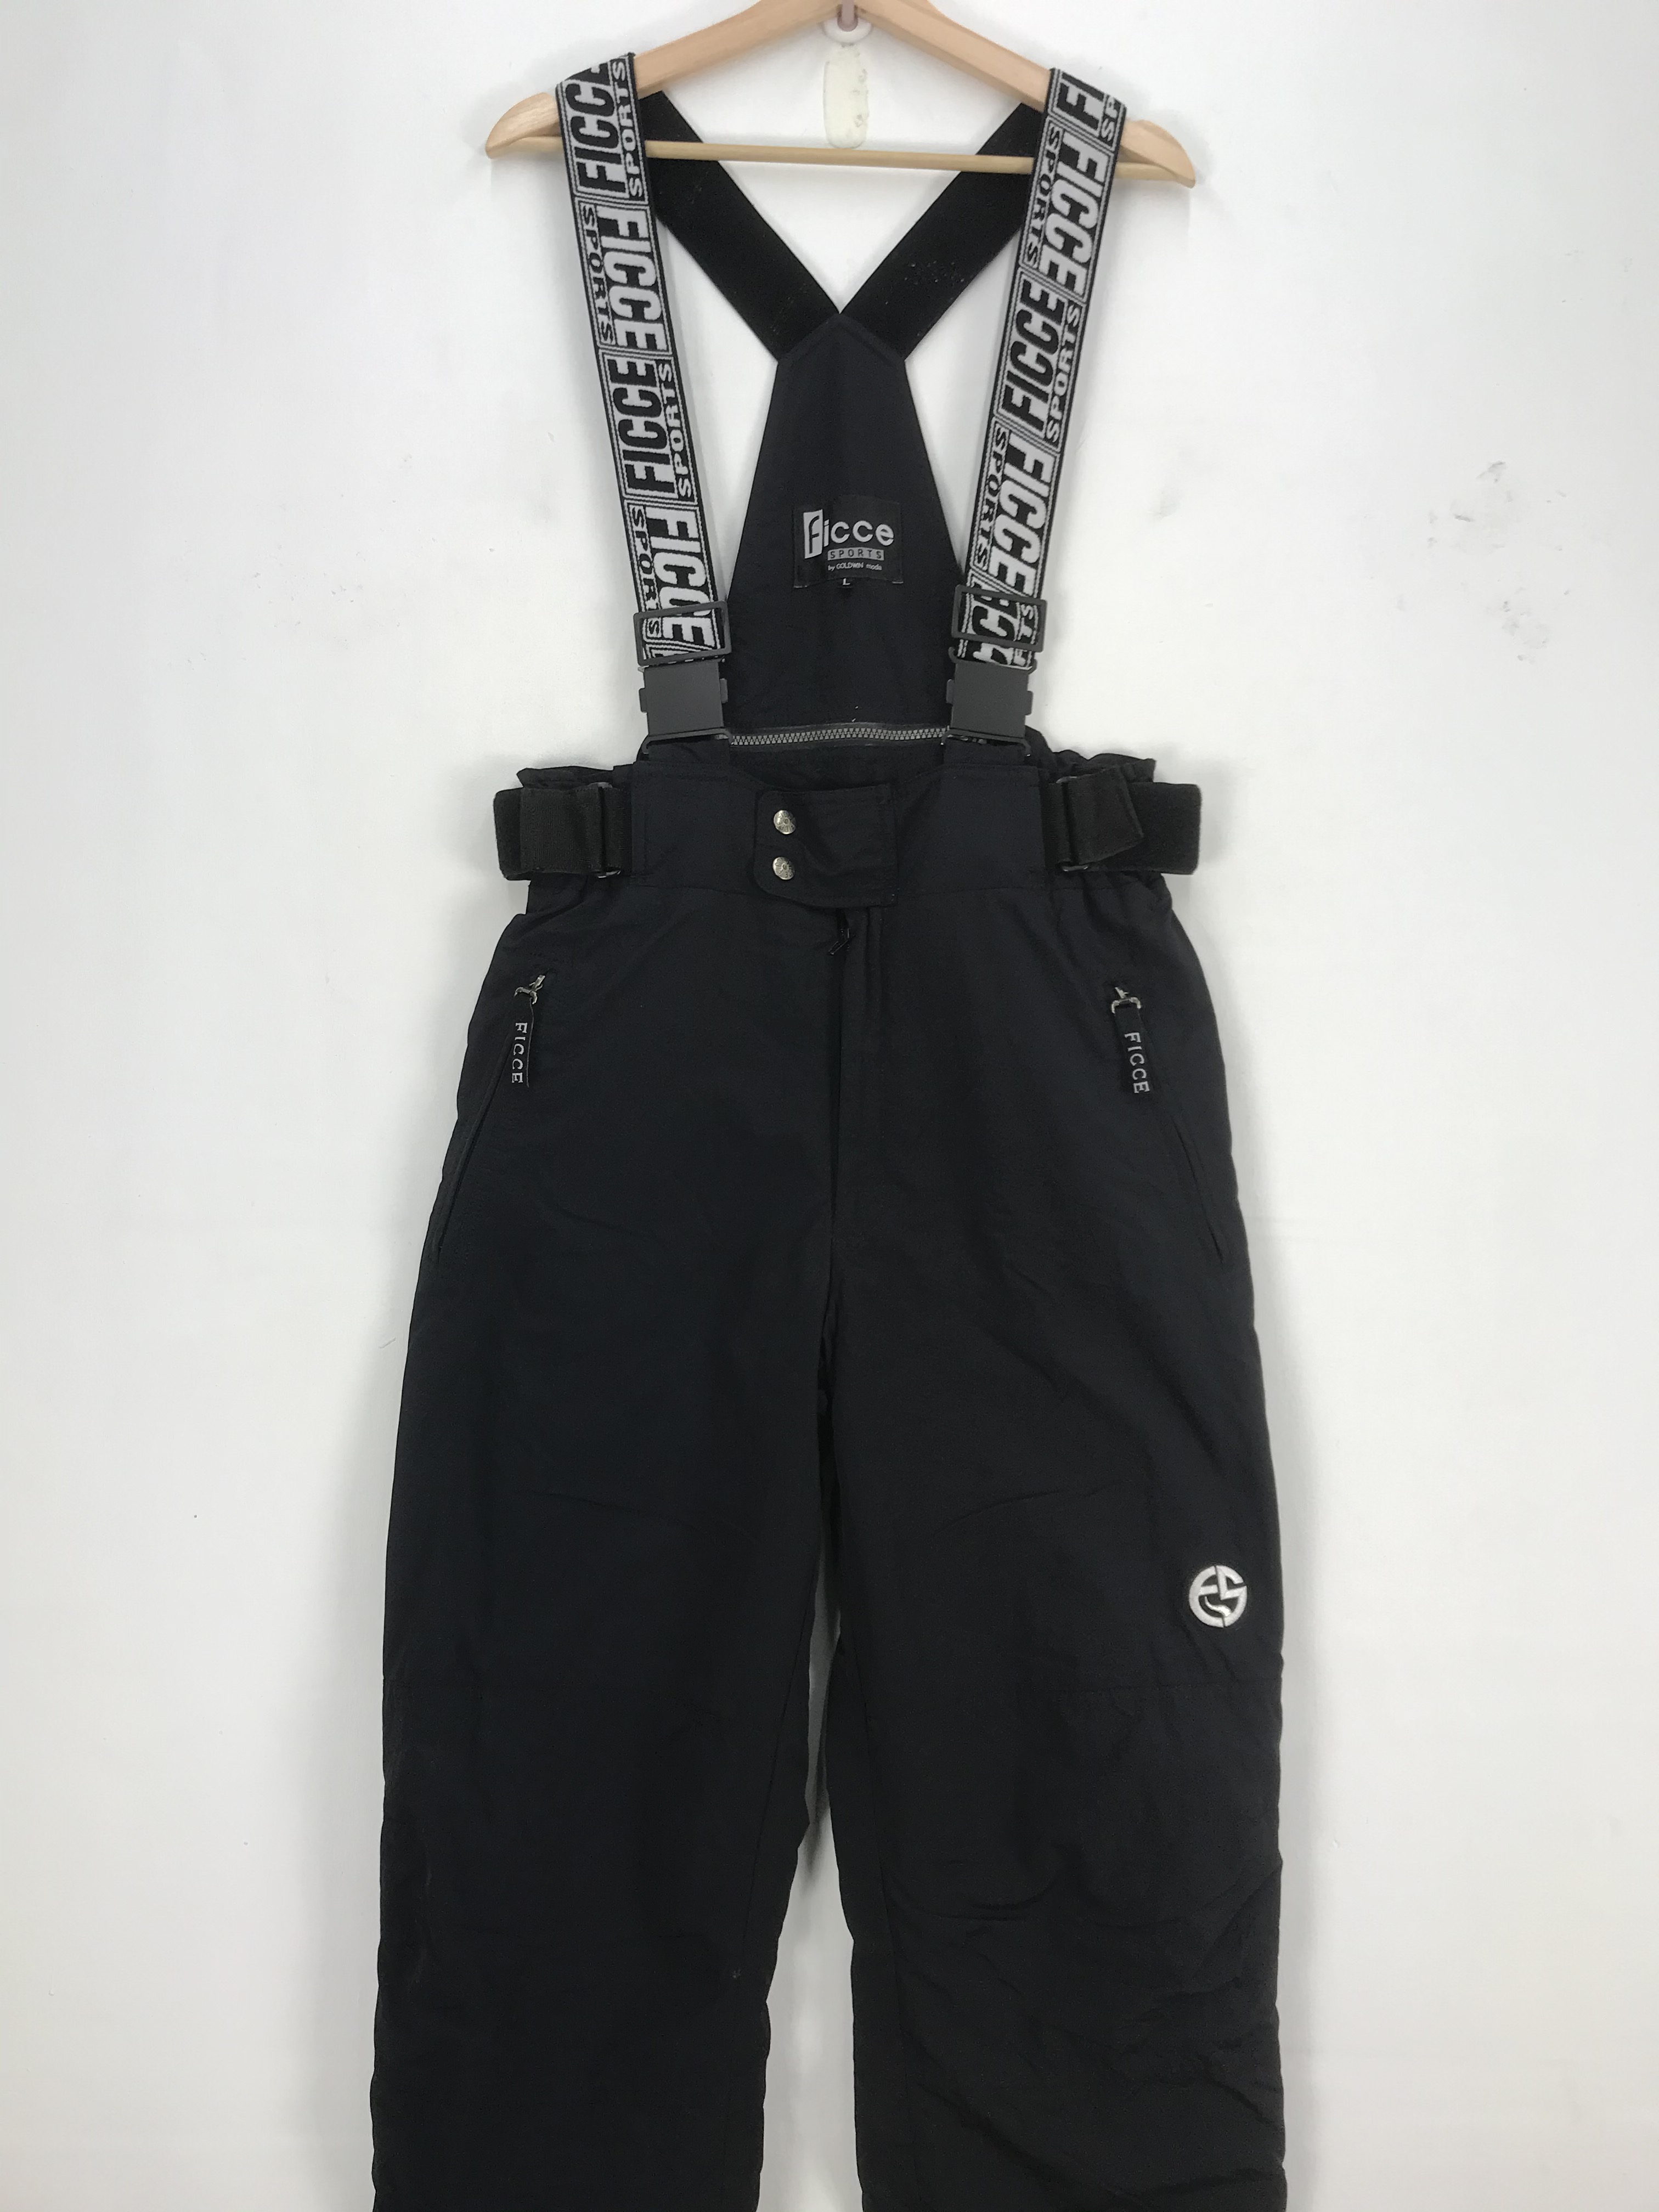 Vintage - Goldwin Ski Suit Ficce Overall Jumpsuit Goldwin Ski Overall - 4